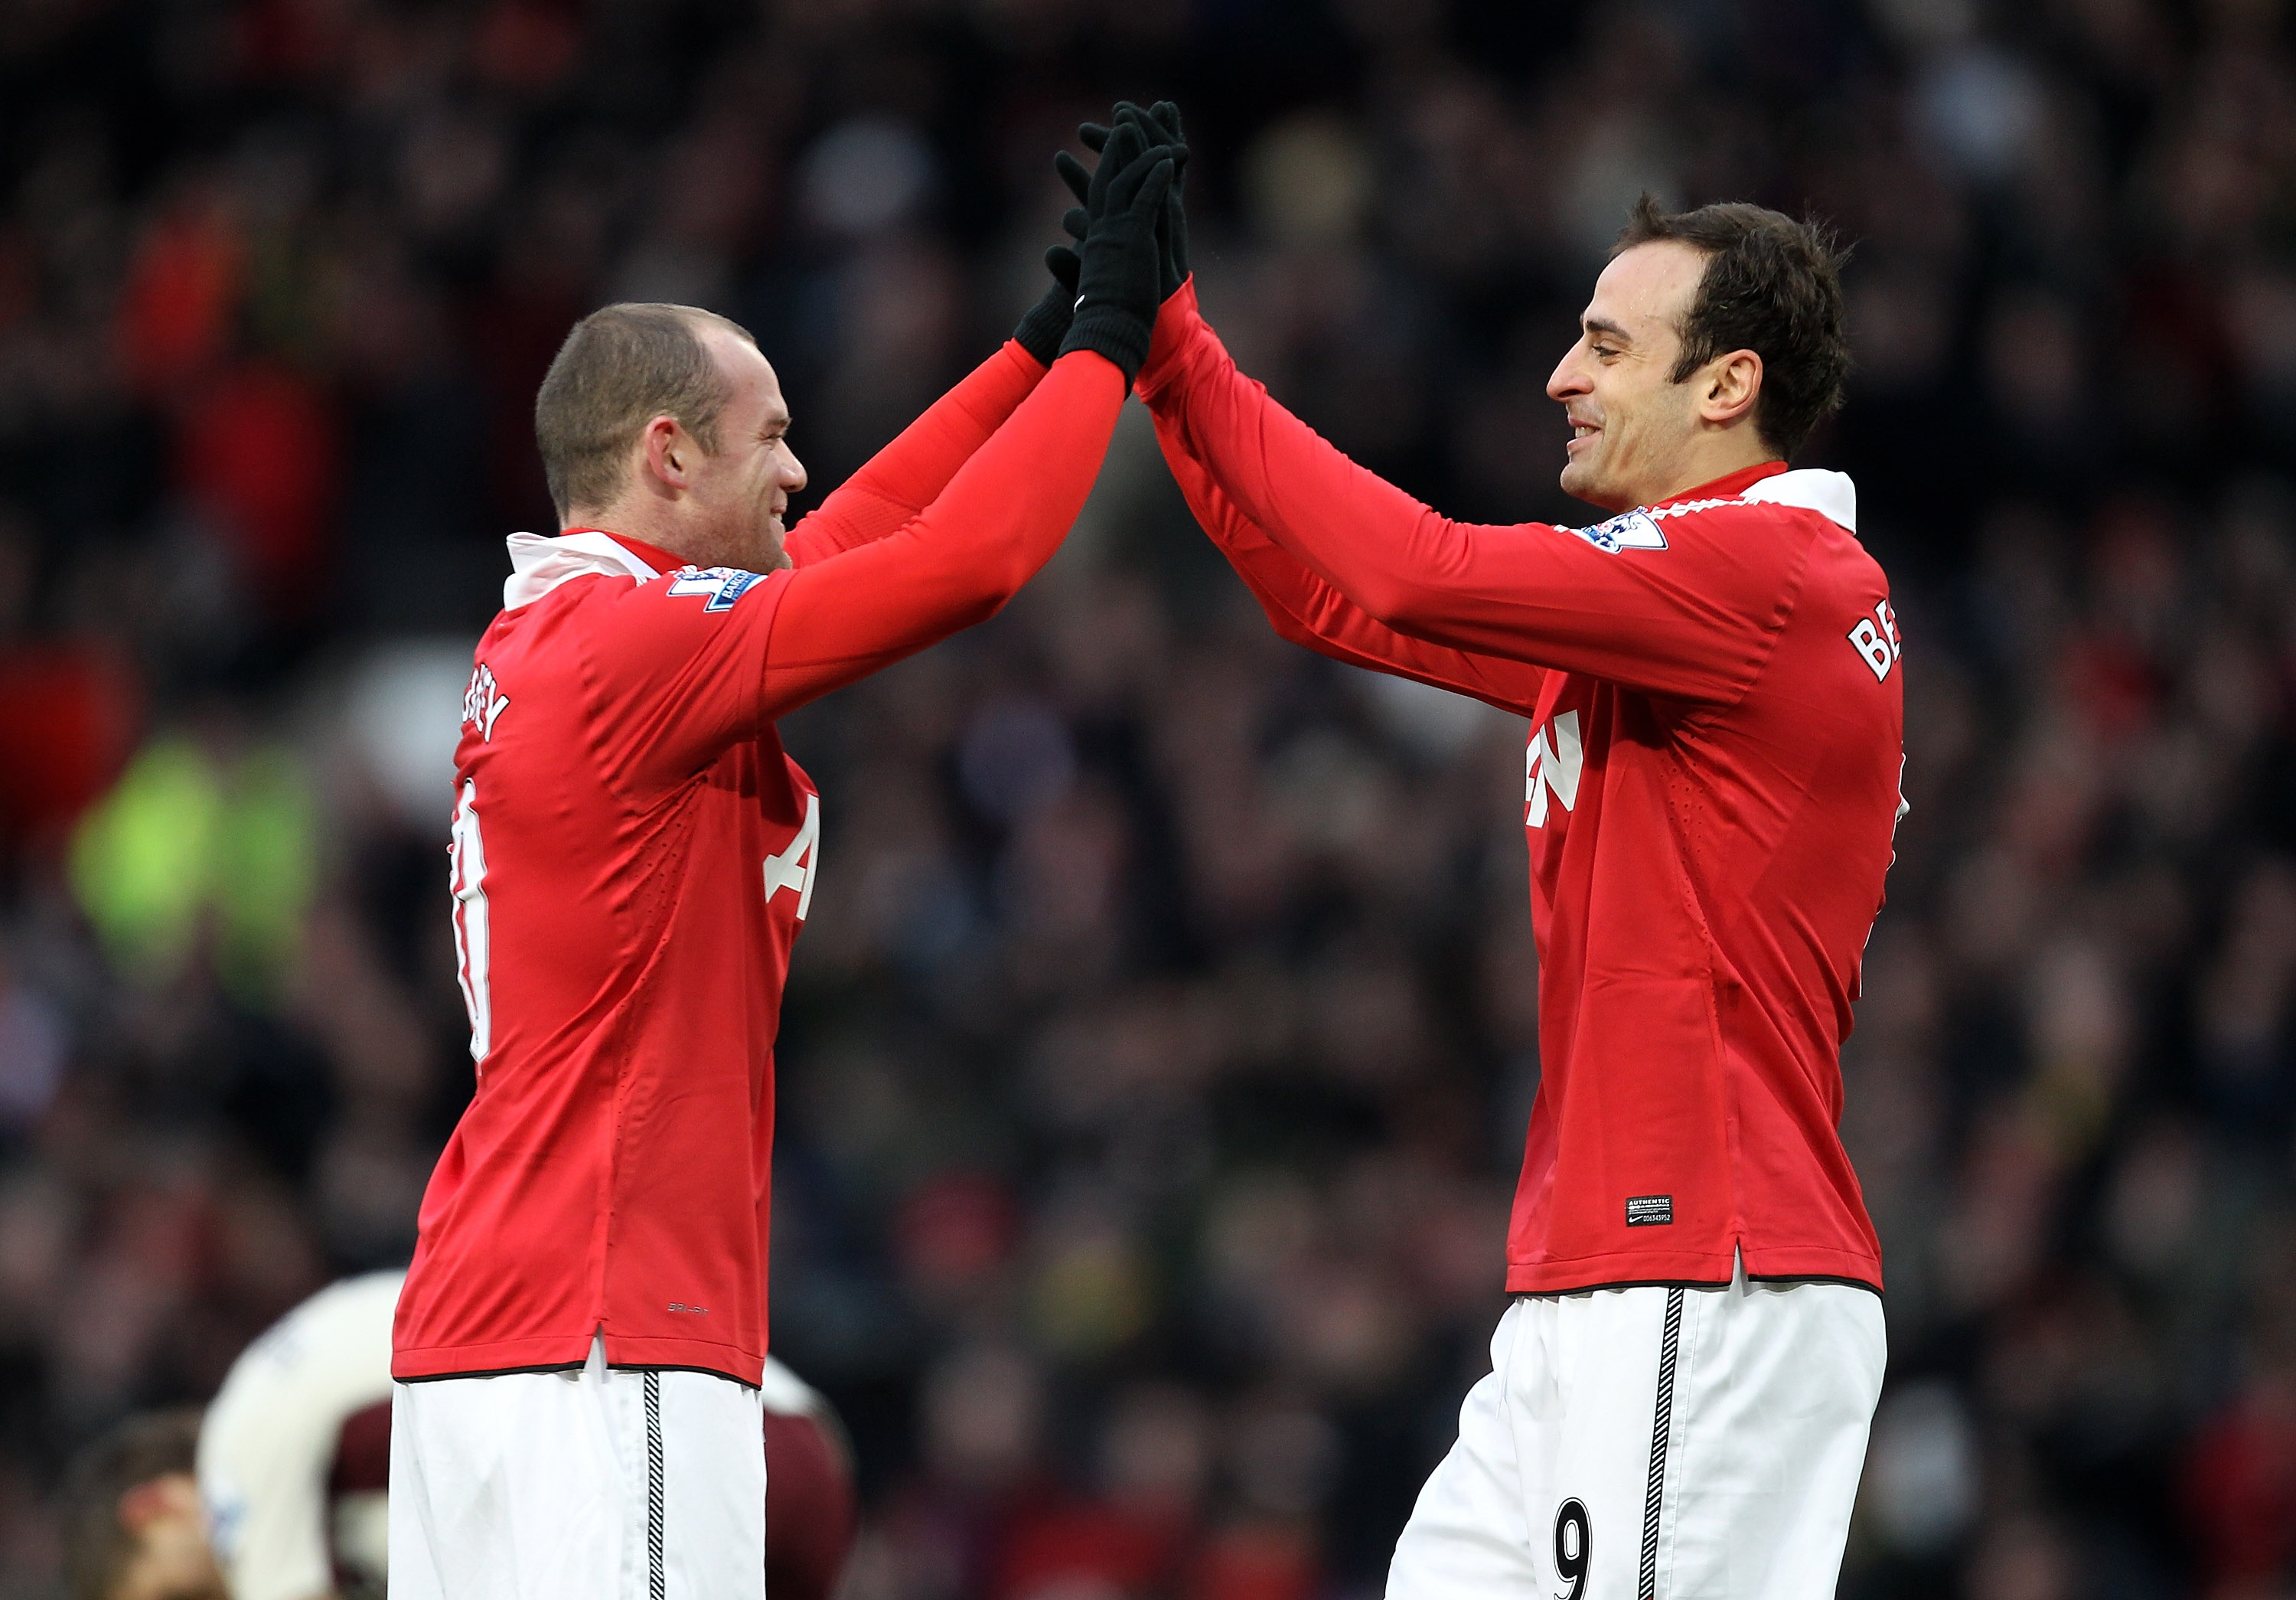 MANCHESTER, ENGLAND - DECEMBER 26:  Dimitar Berbatov of Manchester United celebrates scoring the opening goal with team mate Wayne Rooney (L) during the Barclays Premier League match between Manchester United and Sunderland at Old Trafford on December 26,